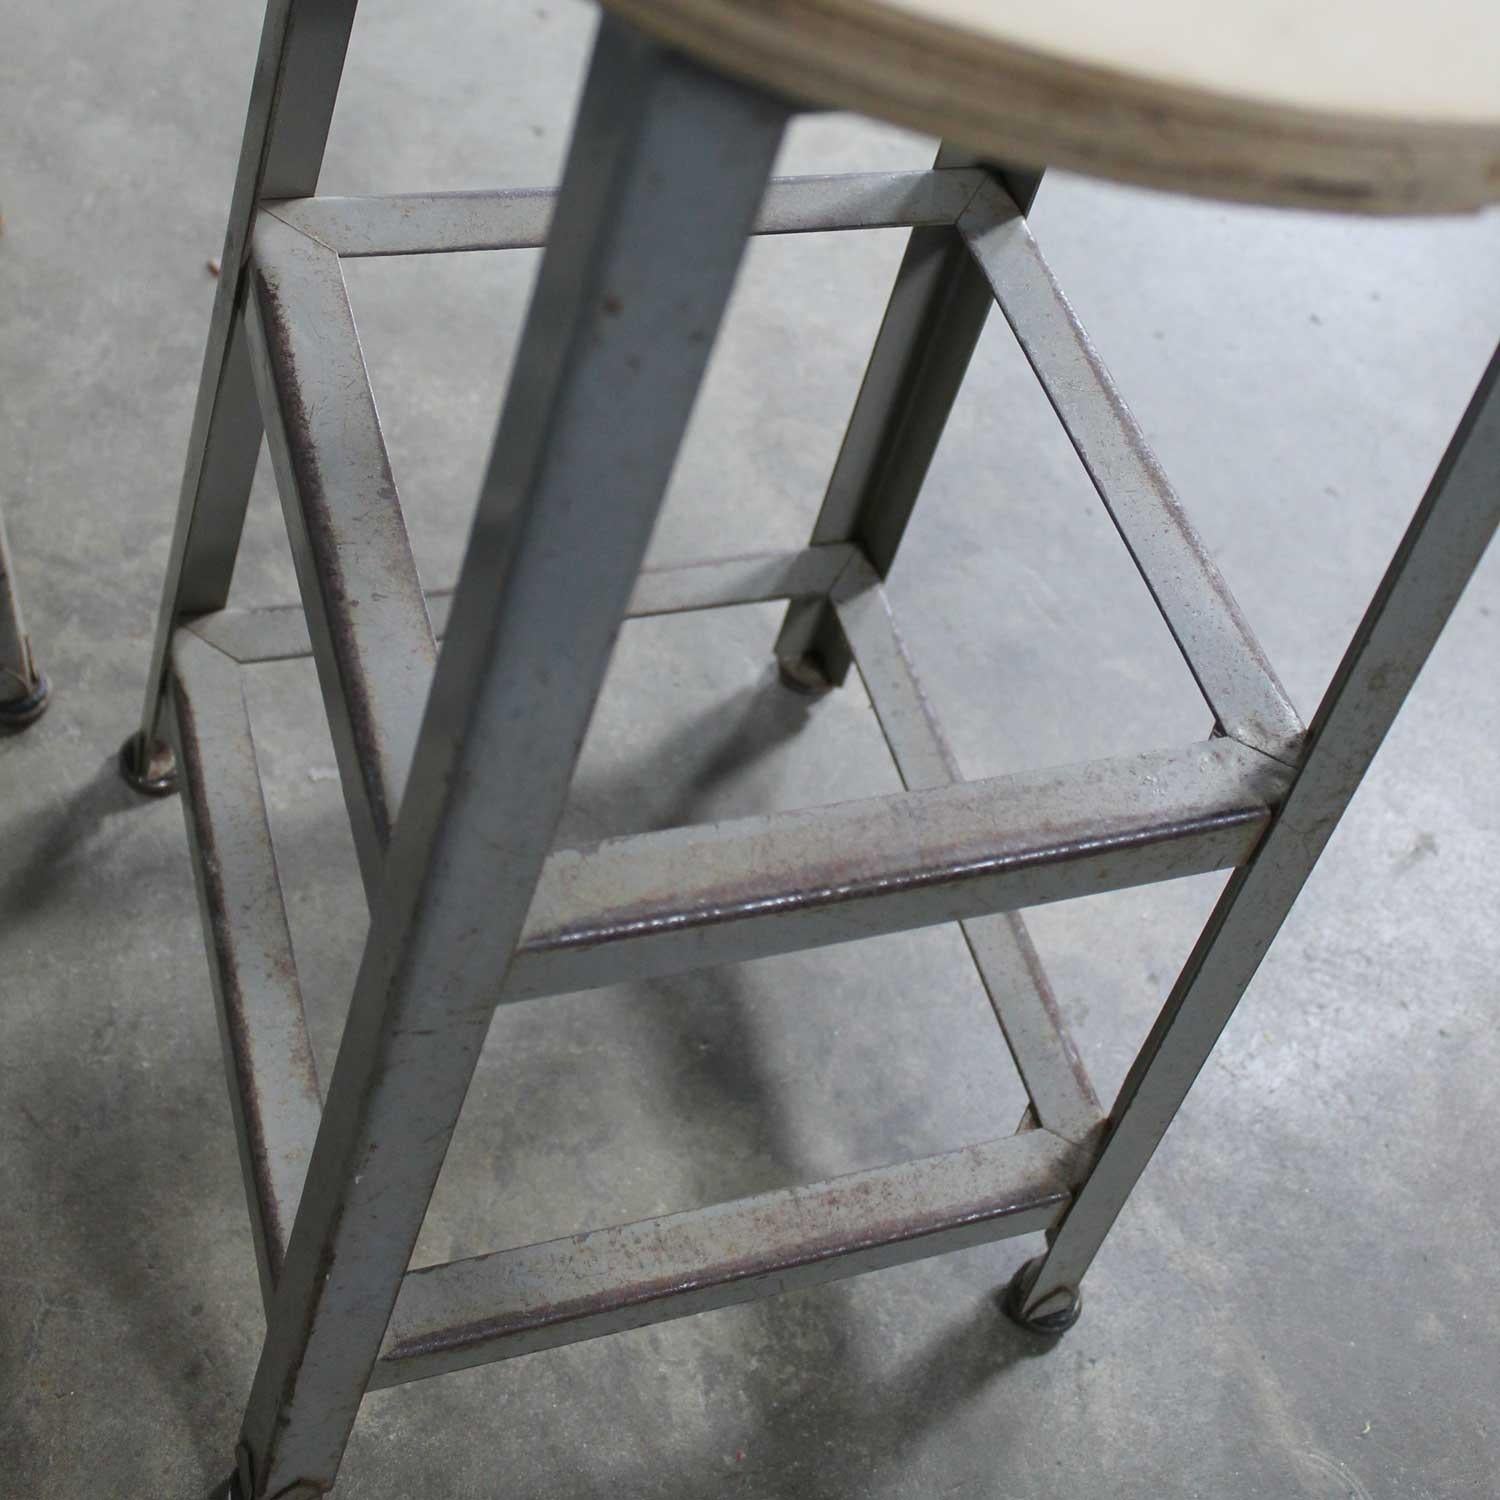 20th Century Industrial Counter Height Stools Vintage Patinated Steel Distressed Wood Seats